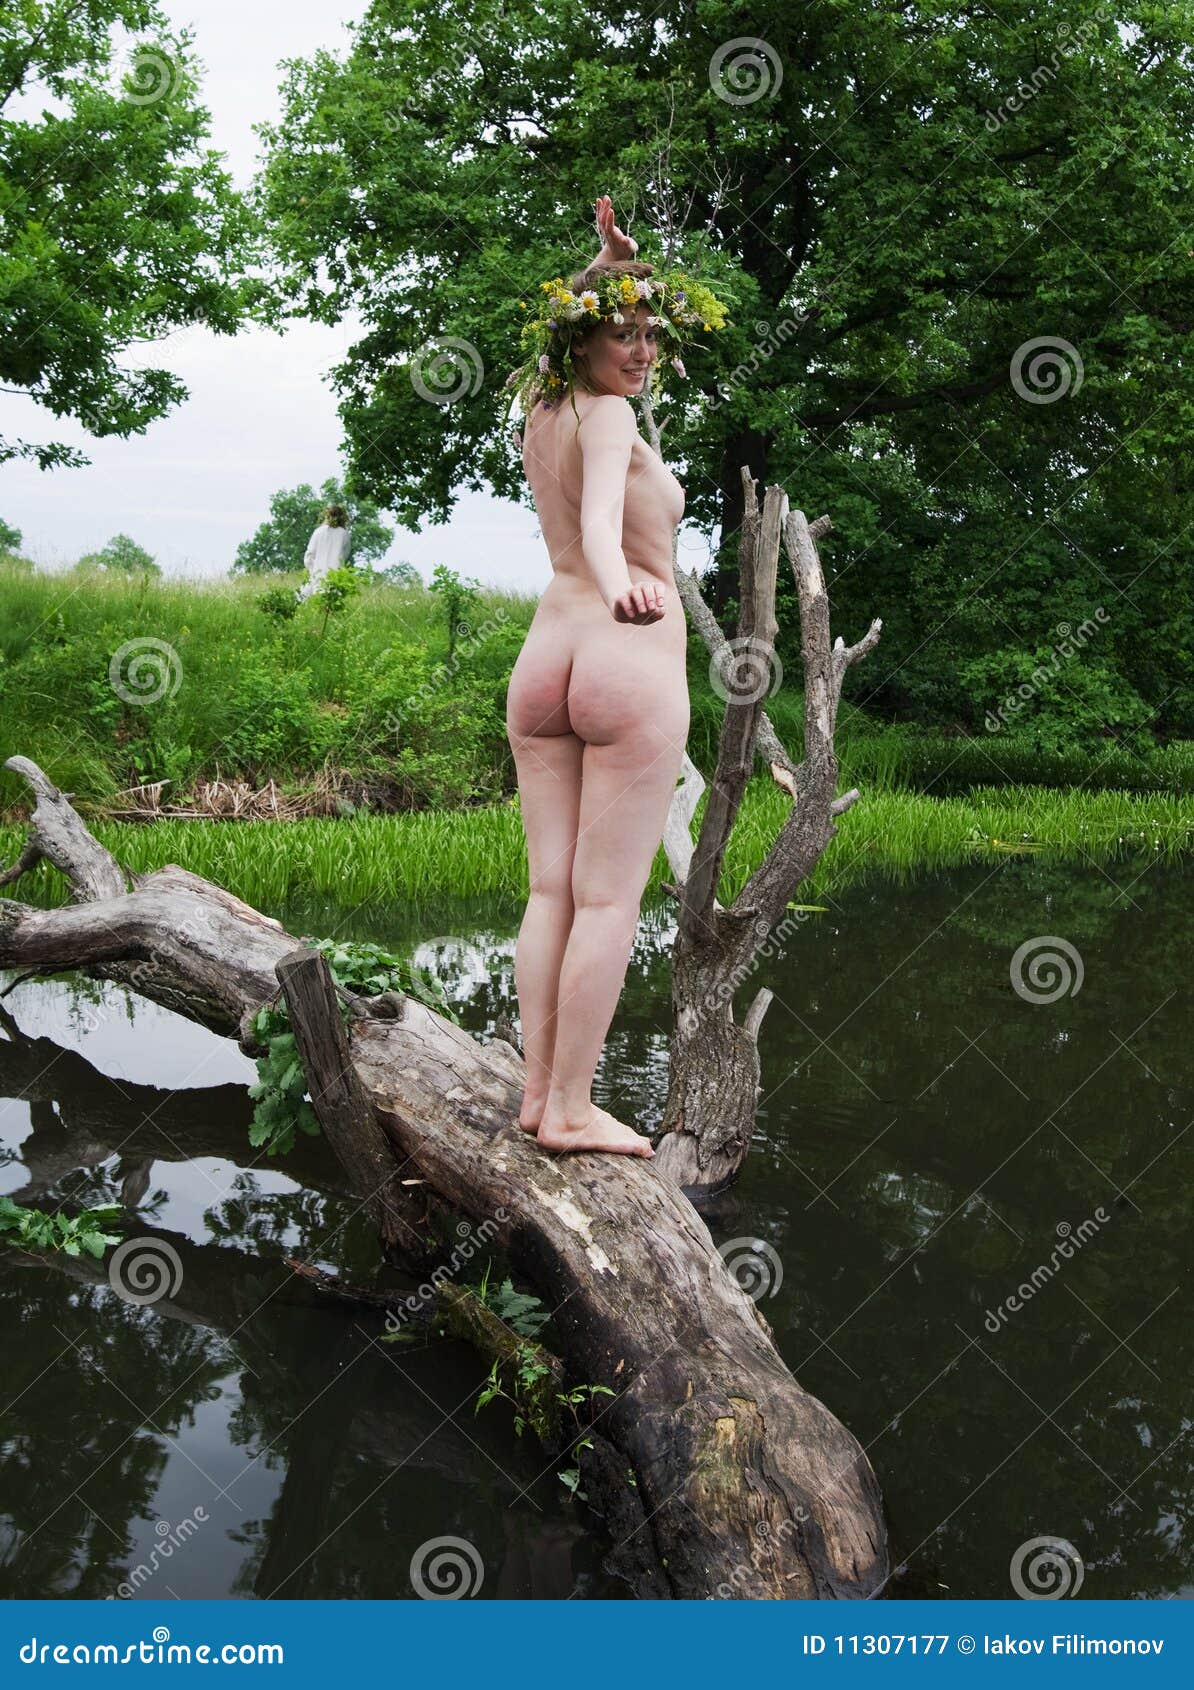 ashley harless recommends naked girls in nature pic